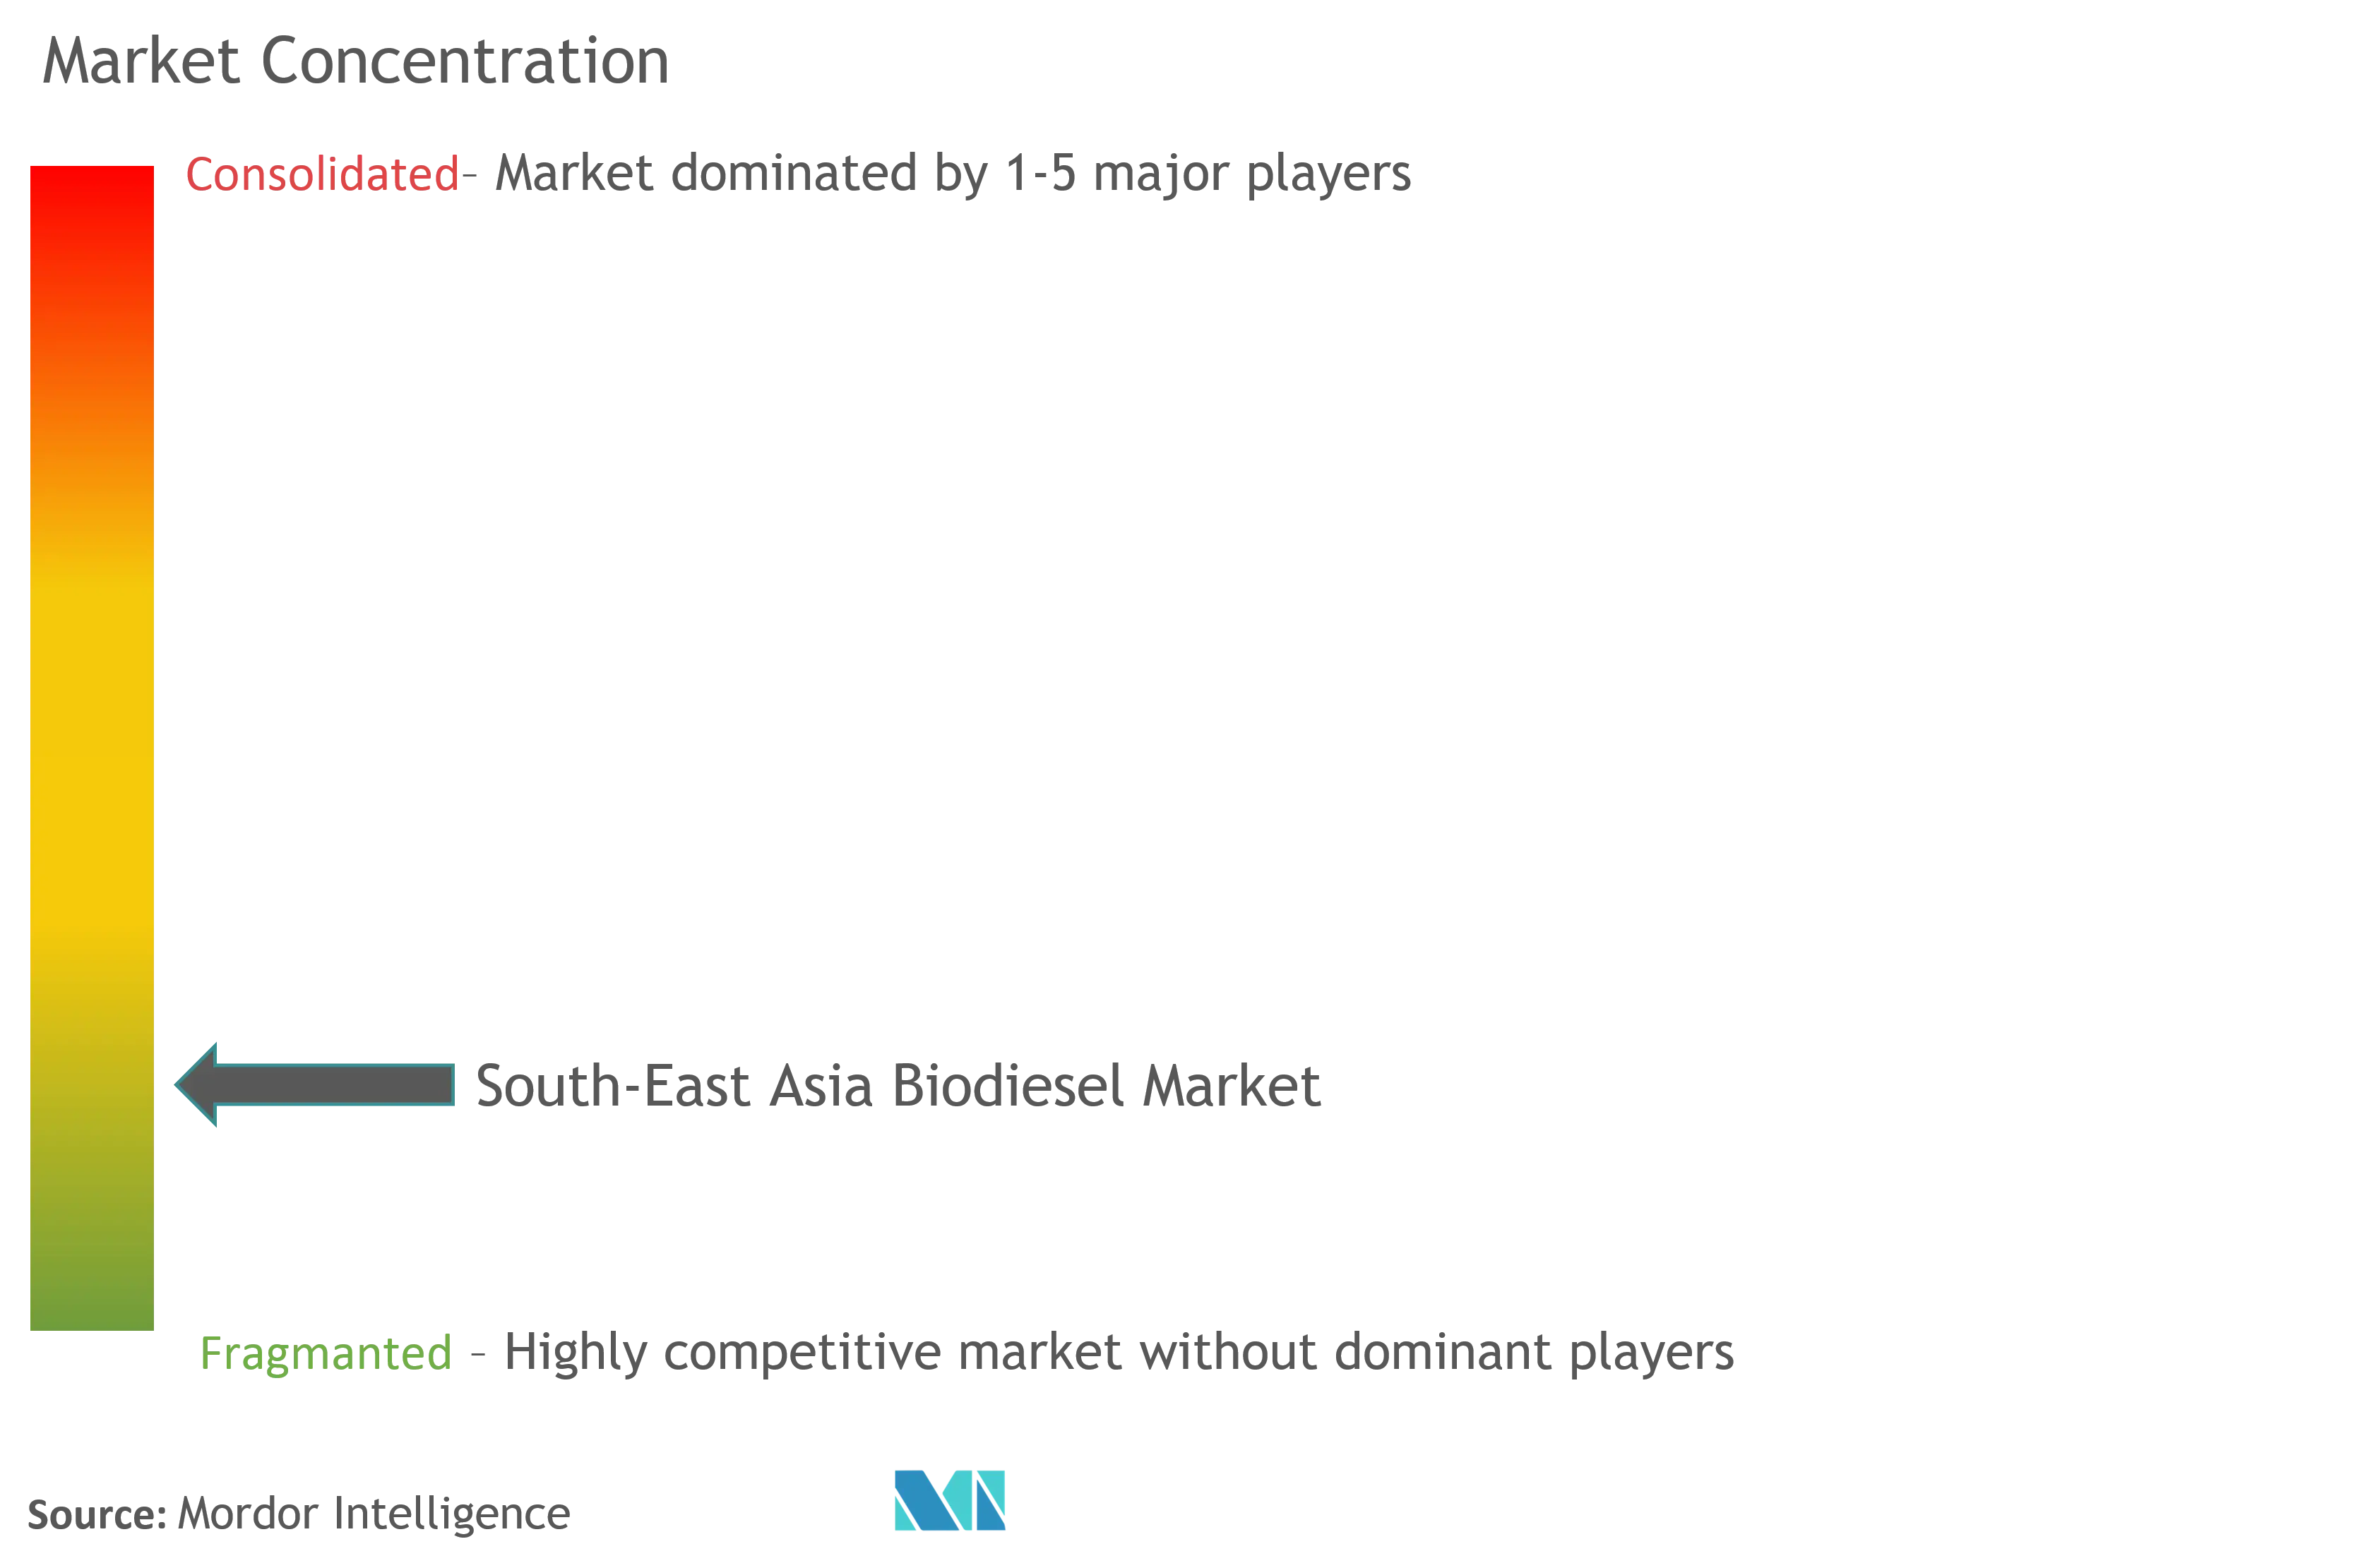 South-East Asia Biodiesel Market Concentration